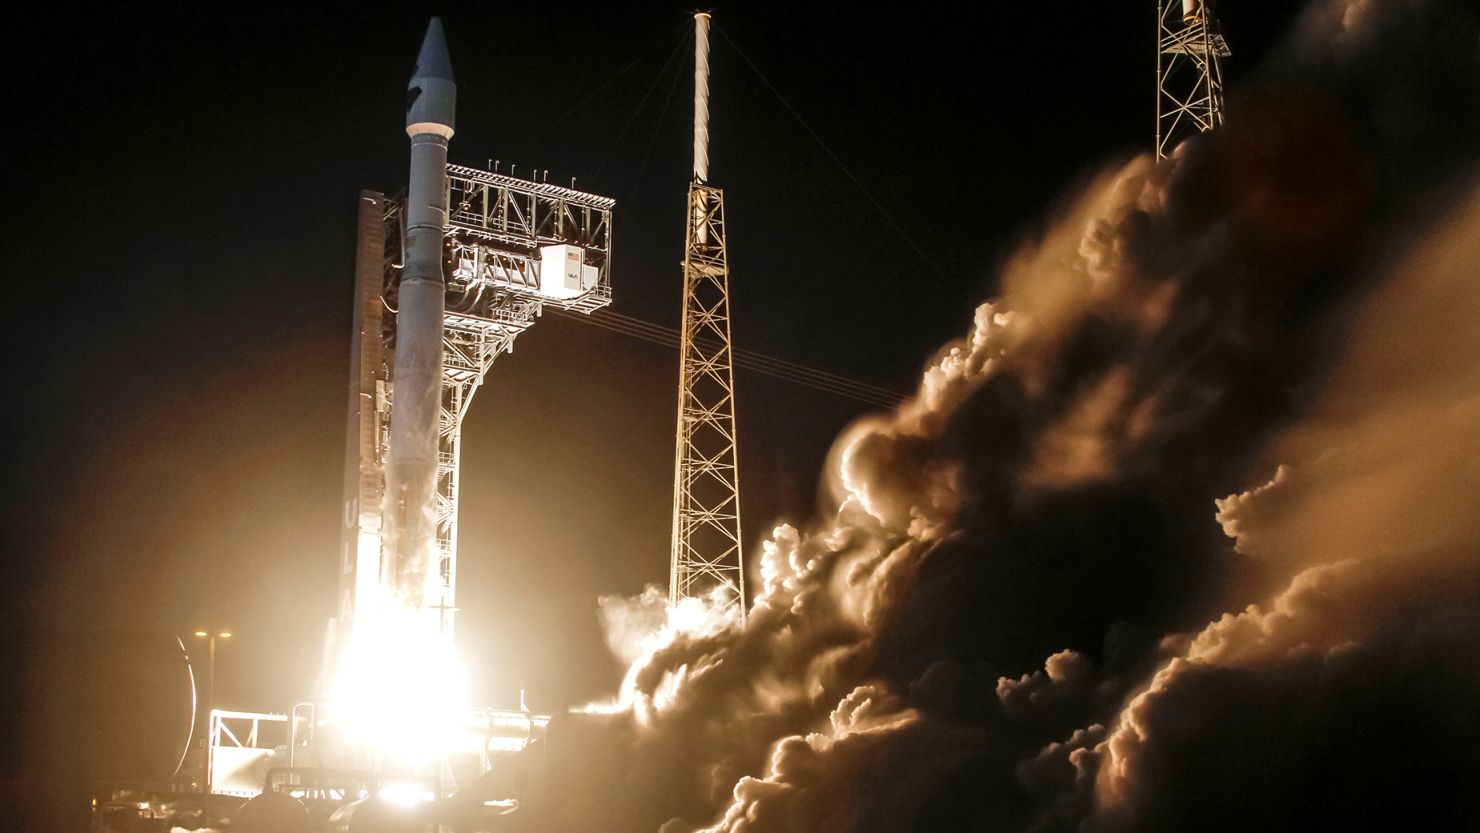 NASA's Lucy spacecraft, atop a United Launch Alliance Atlas 5 rocket, launched from Florida's Cape Canaveral Space Force Station on a mission to study the Trojan asteroids in October 2021. Lucy flew by an asteroid called Dinkinesh in 2023 on its way out to its final destination, offering stunning revelations about the space rock.